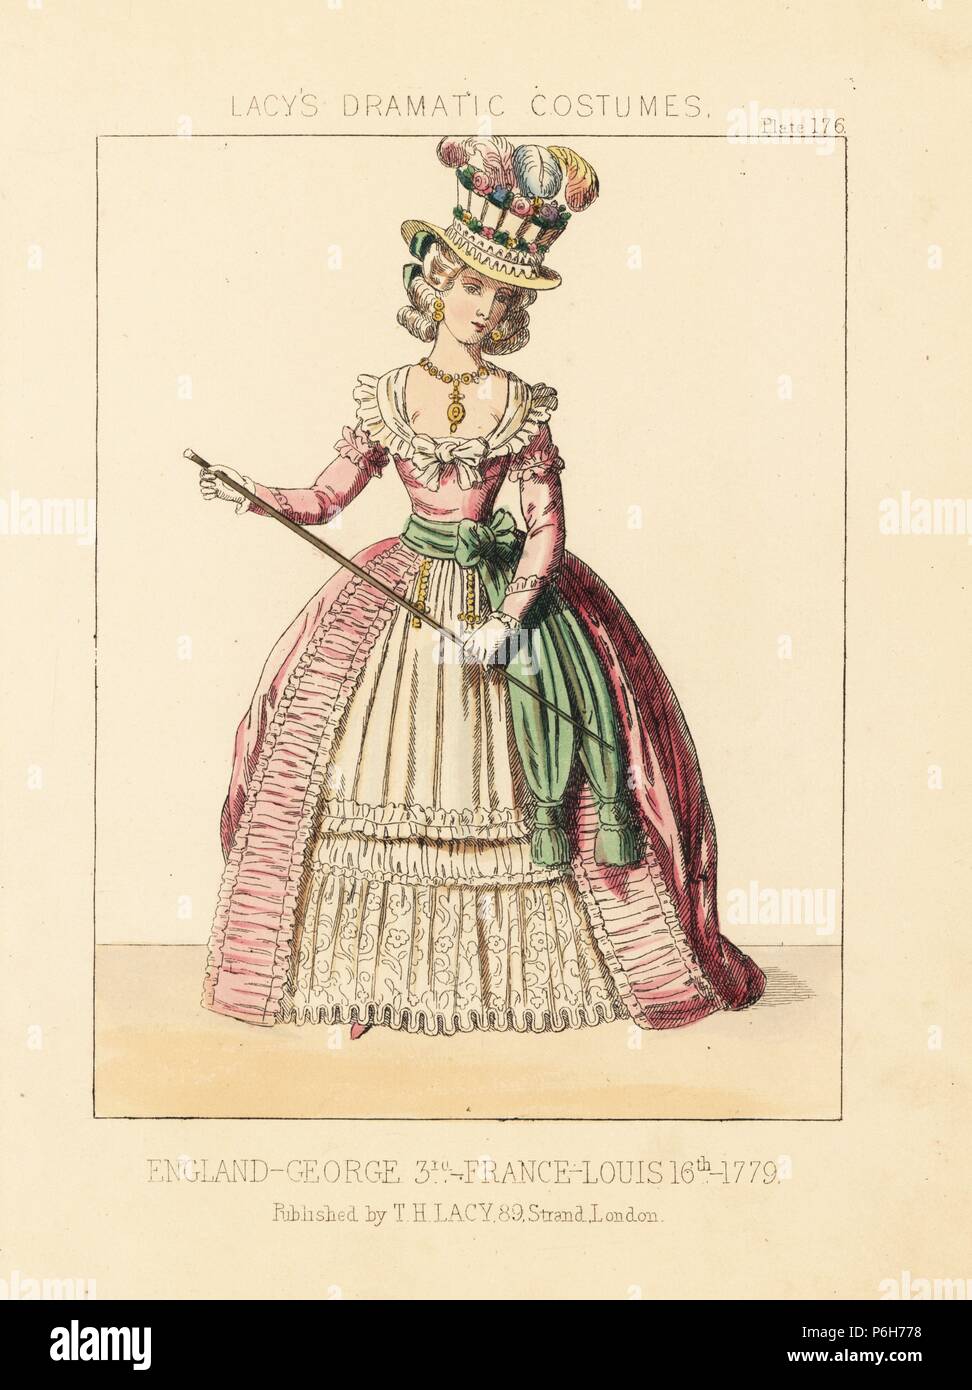 Costume of a lady, reign of George III, Louis XVI, 1779. She wears